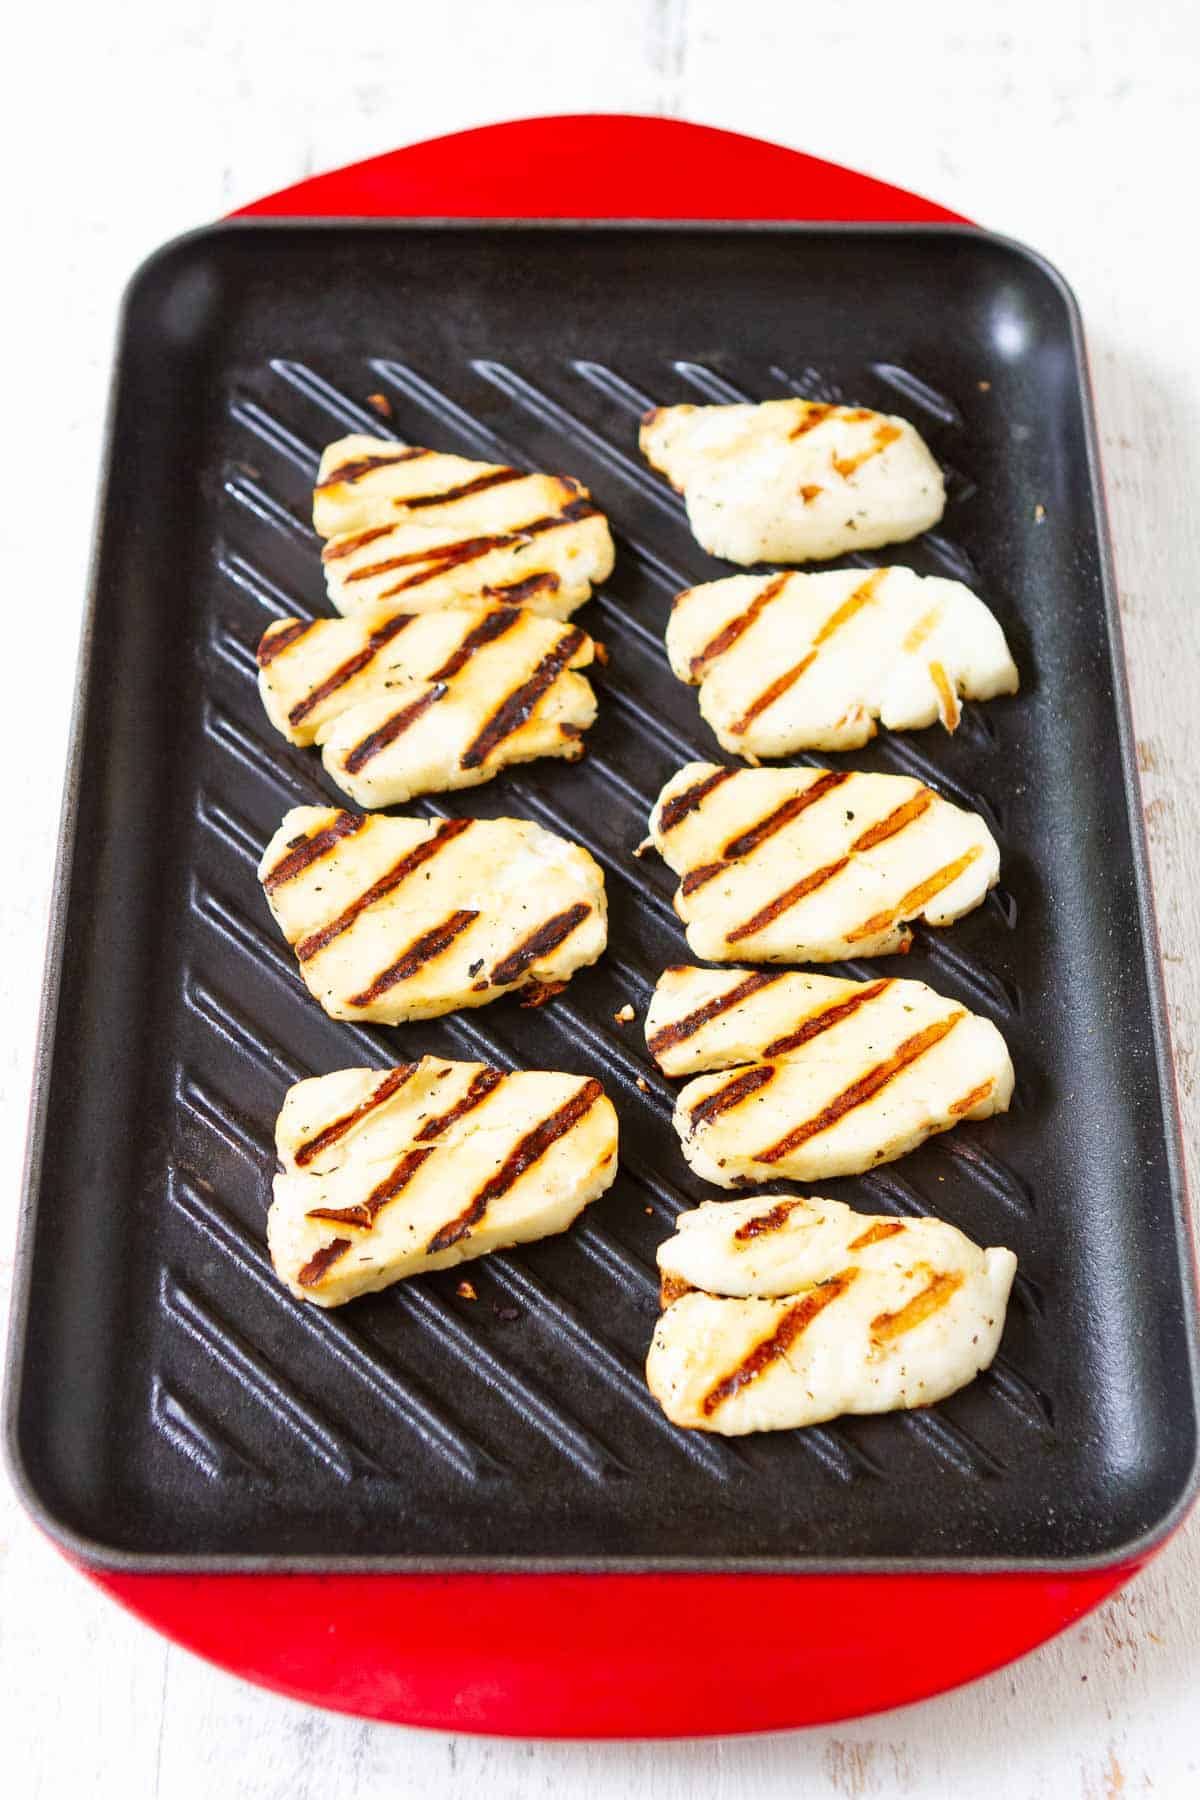 Grilled halloumi cheese slices on a cast iron grill.